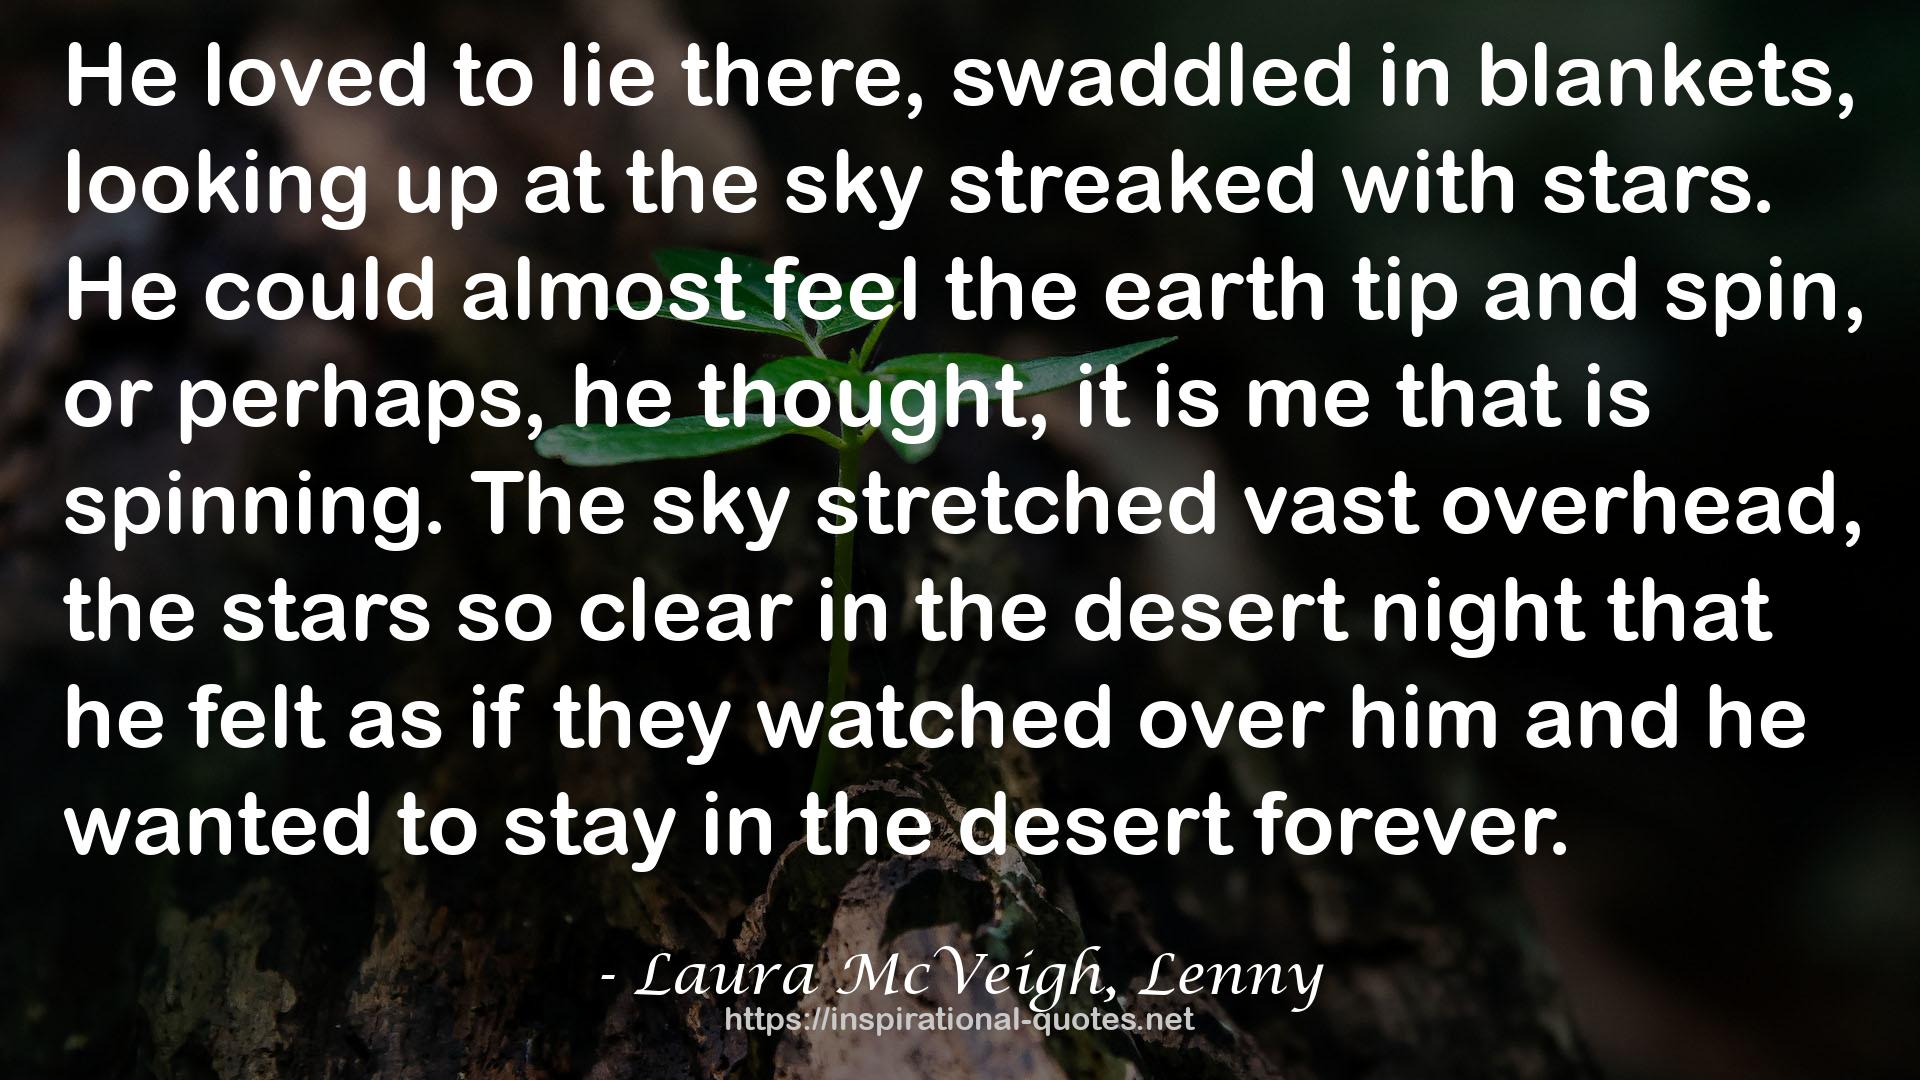 Laura McVeigh, Lenny QUOTES